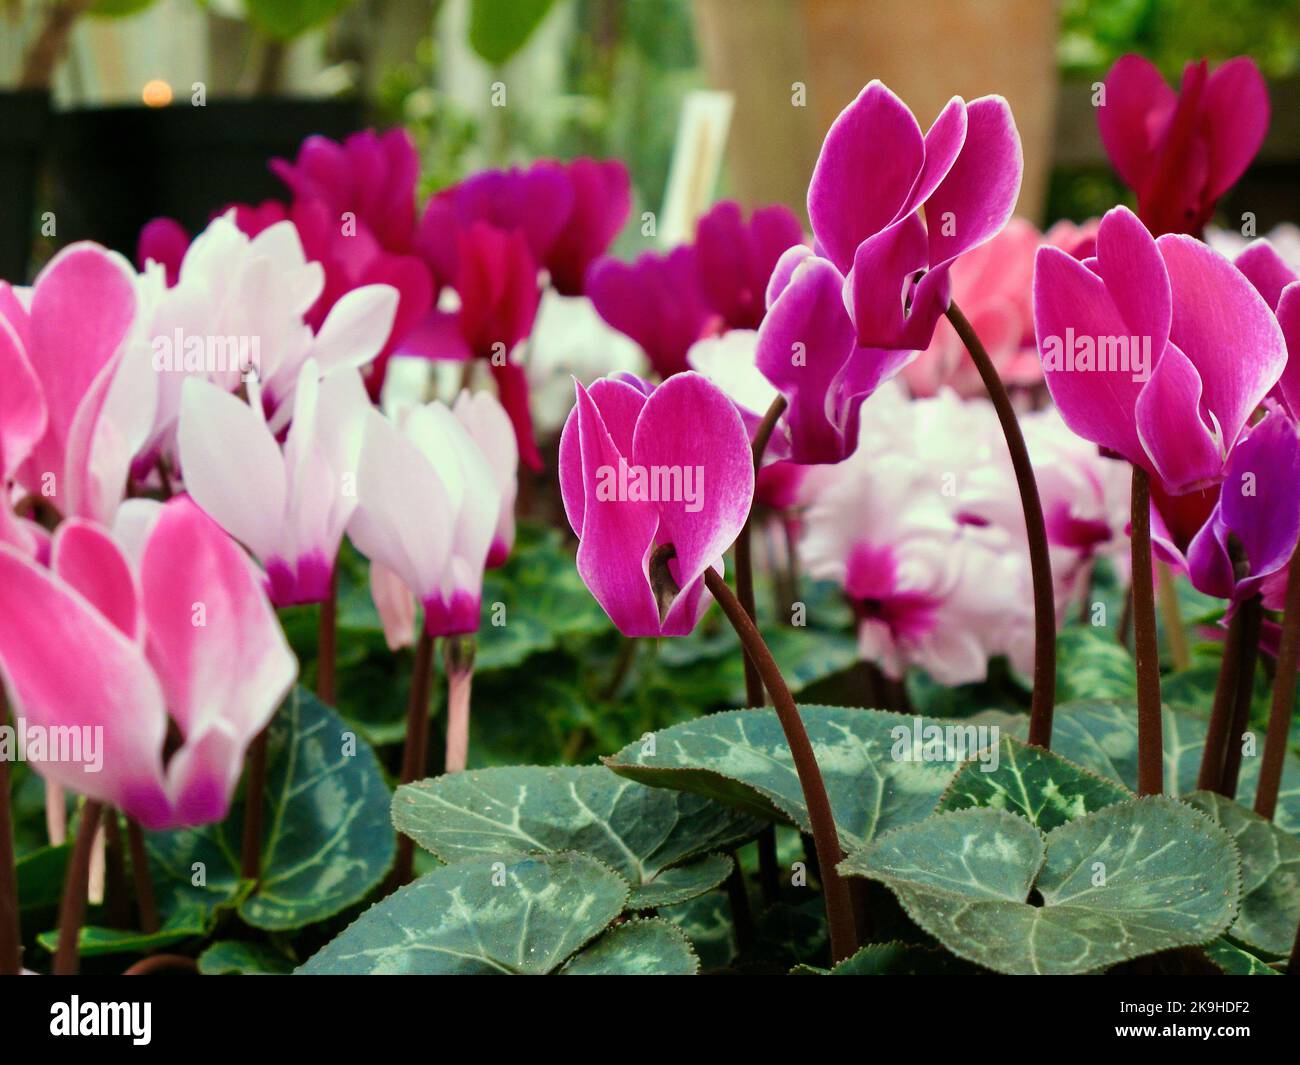 Potted cyclamen plants with pale pink and purple flowers and green marbled leaves for sale in autumn. Stock Photo